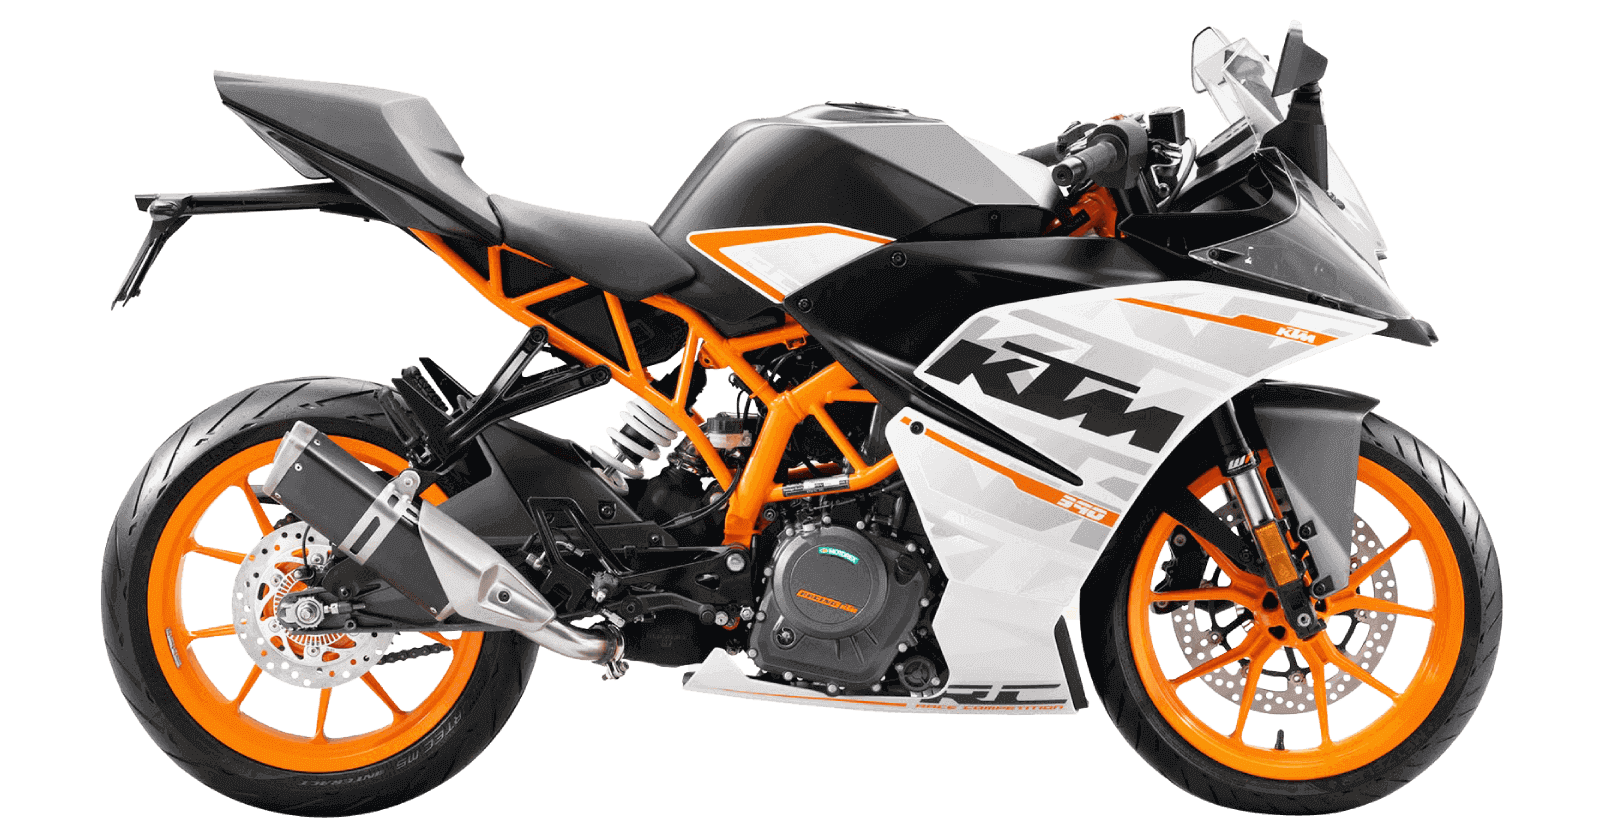 List of Top 15 and Best Bikes Under 5 Lakh in India Check Price List